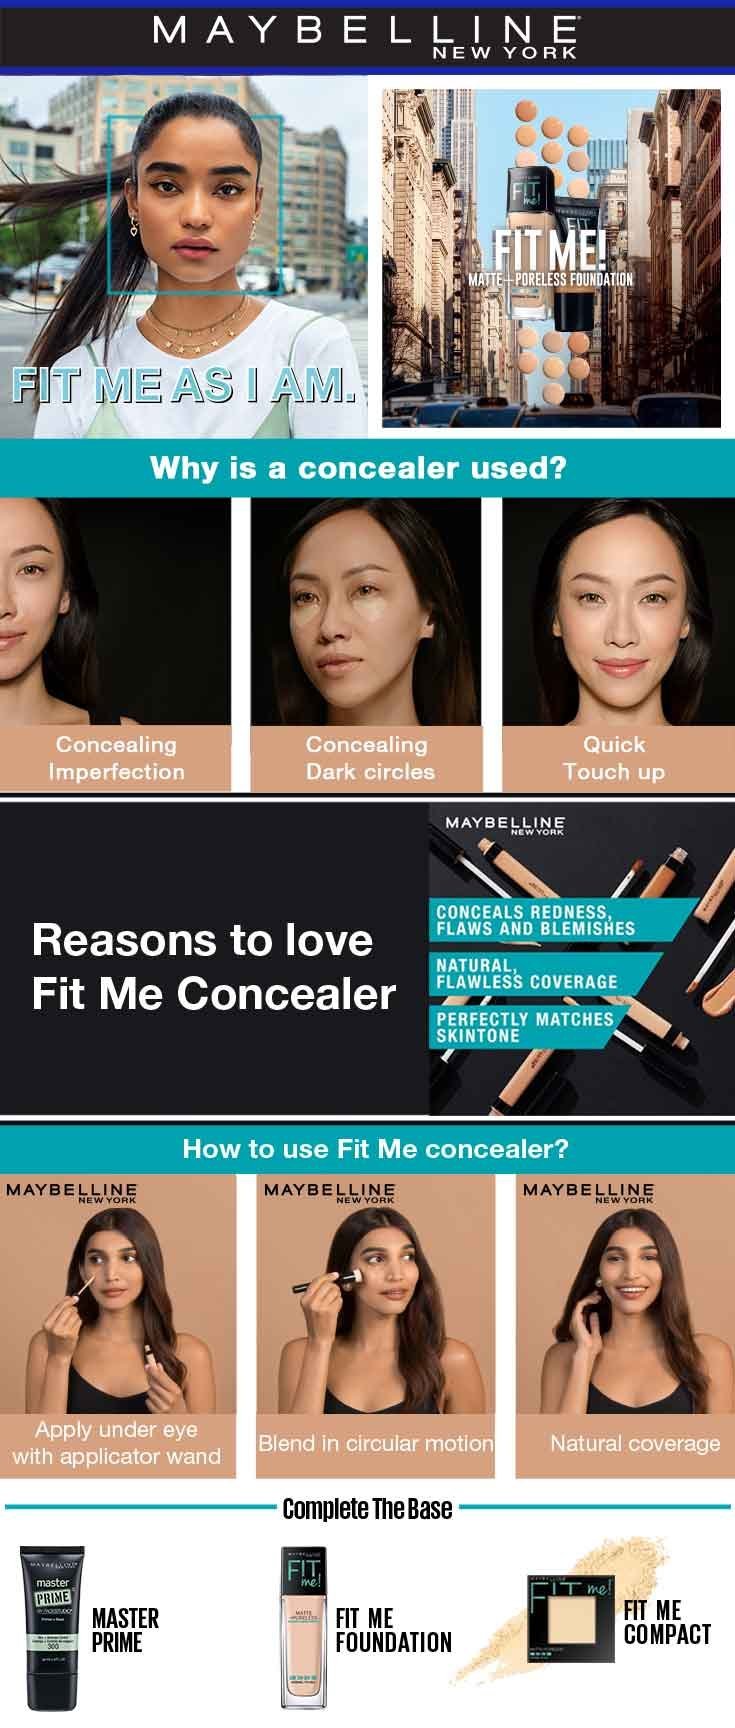 Maybelline Fit Me Concealer - Uses, Features, How to Apply